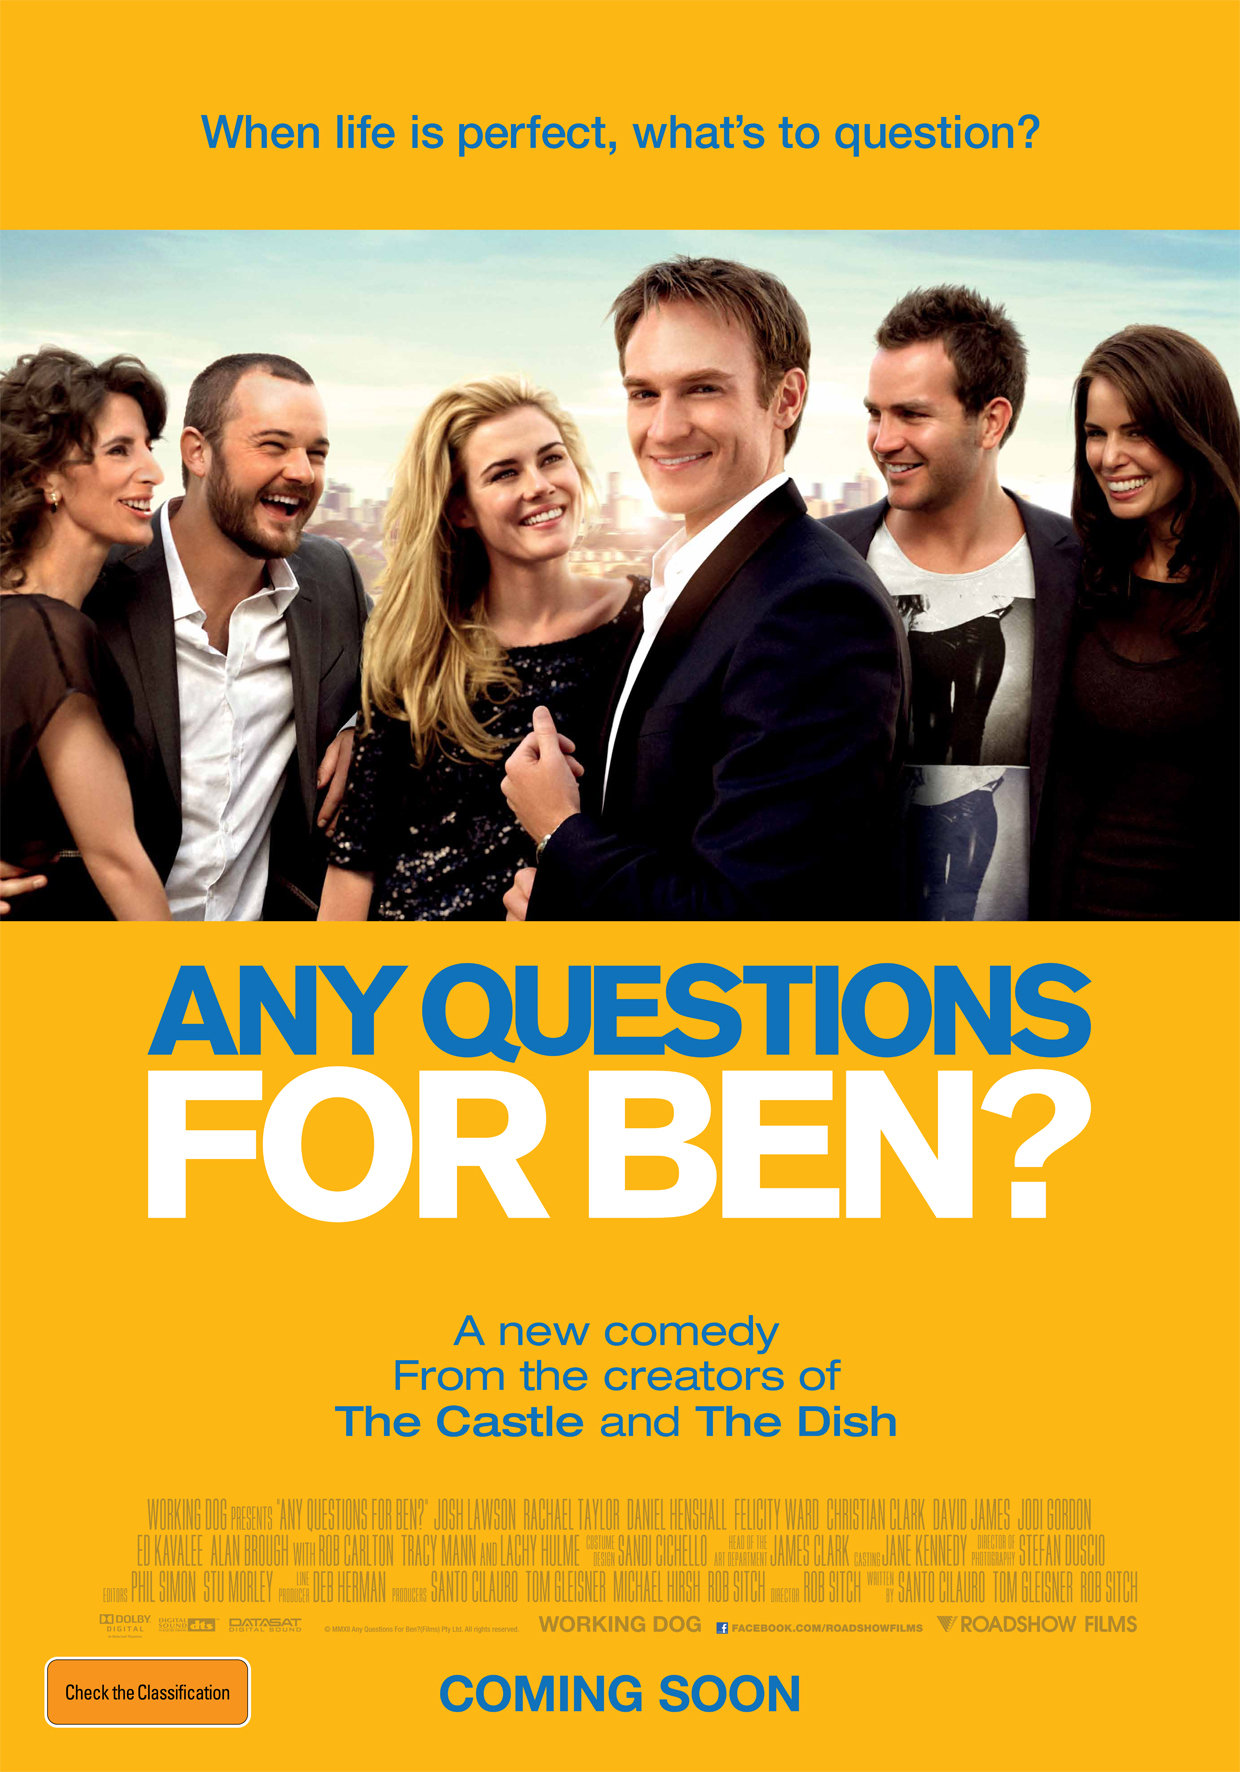 Any Questions For Ben movie nude scenes